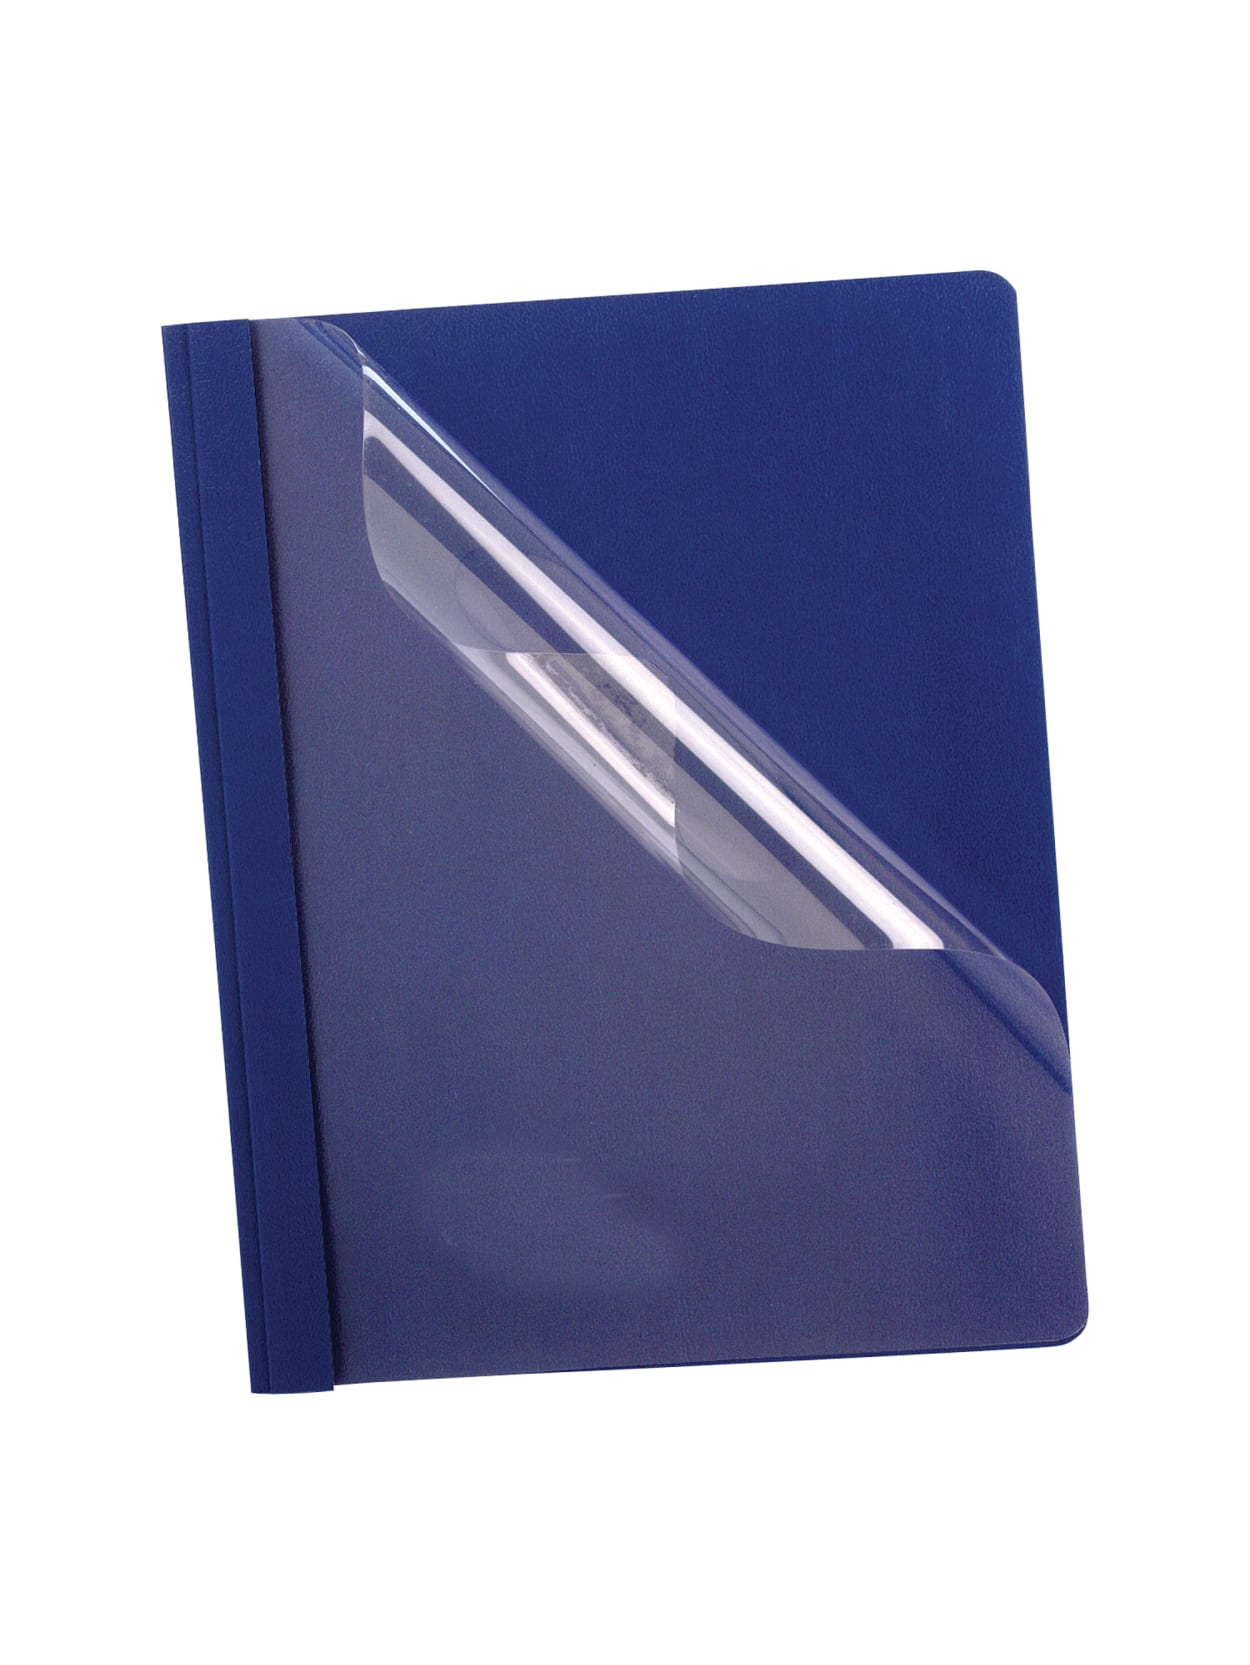 1 x Blue Perforated Presentation Project File Hard A4 Clear Document Folder Organiser Holder Display